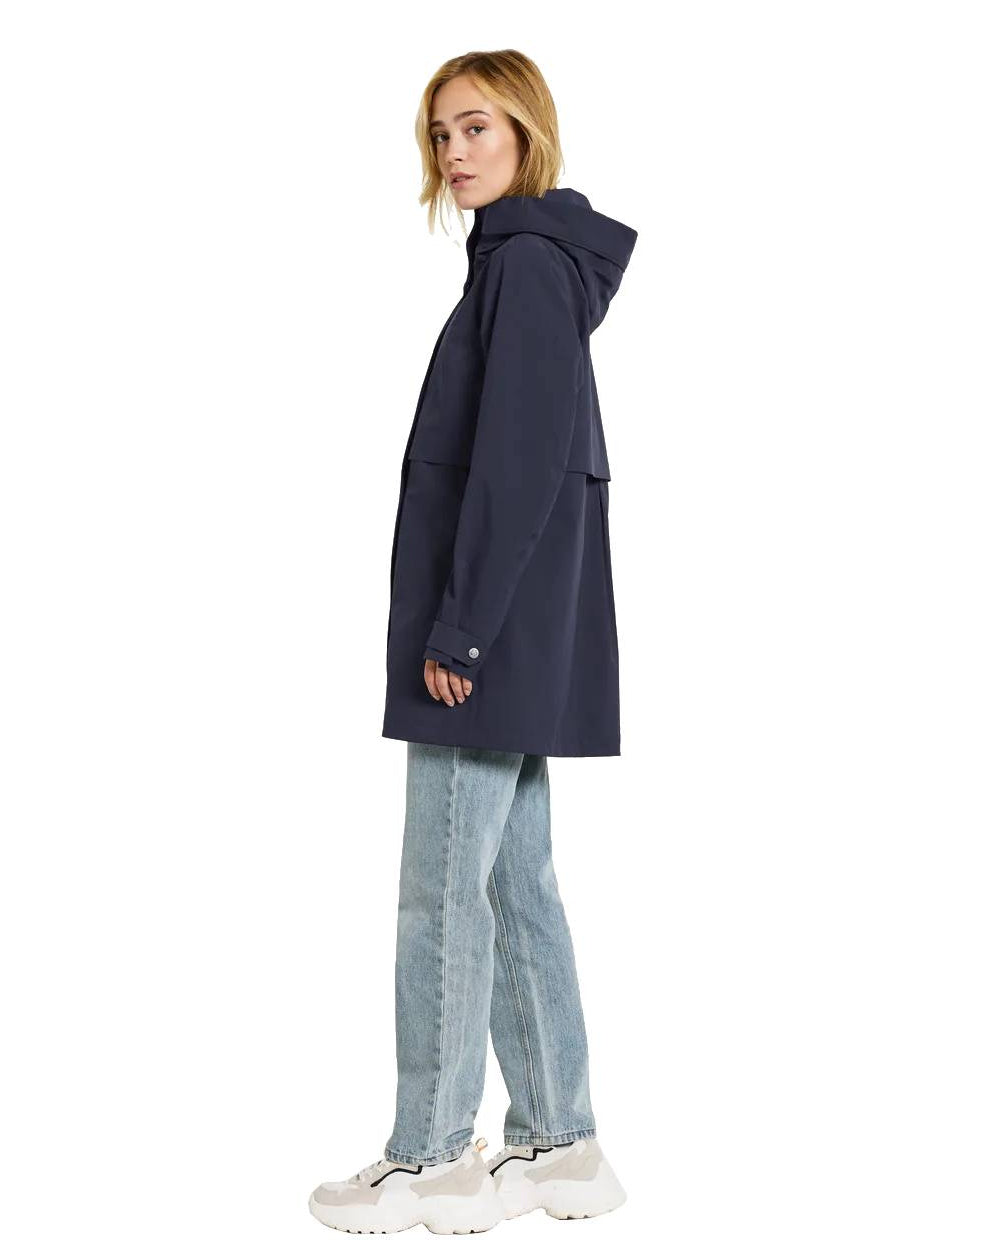 Dark Night Blue Coloured Didriksons Edith Parka On A White Background 